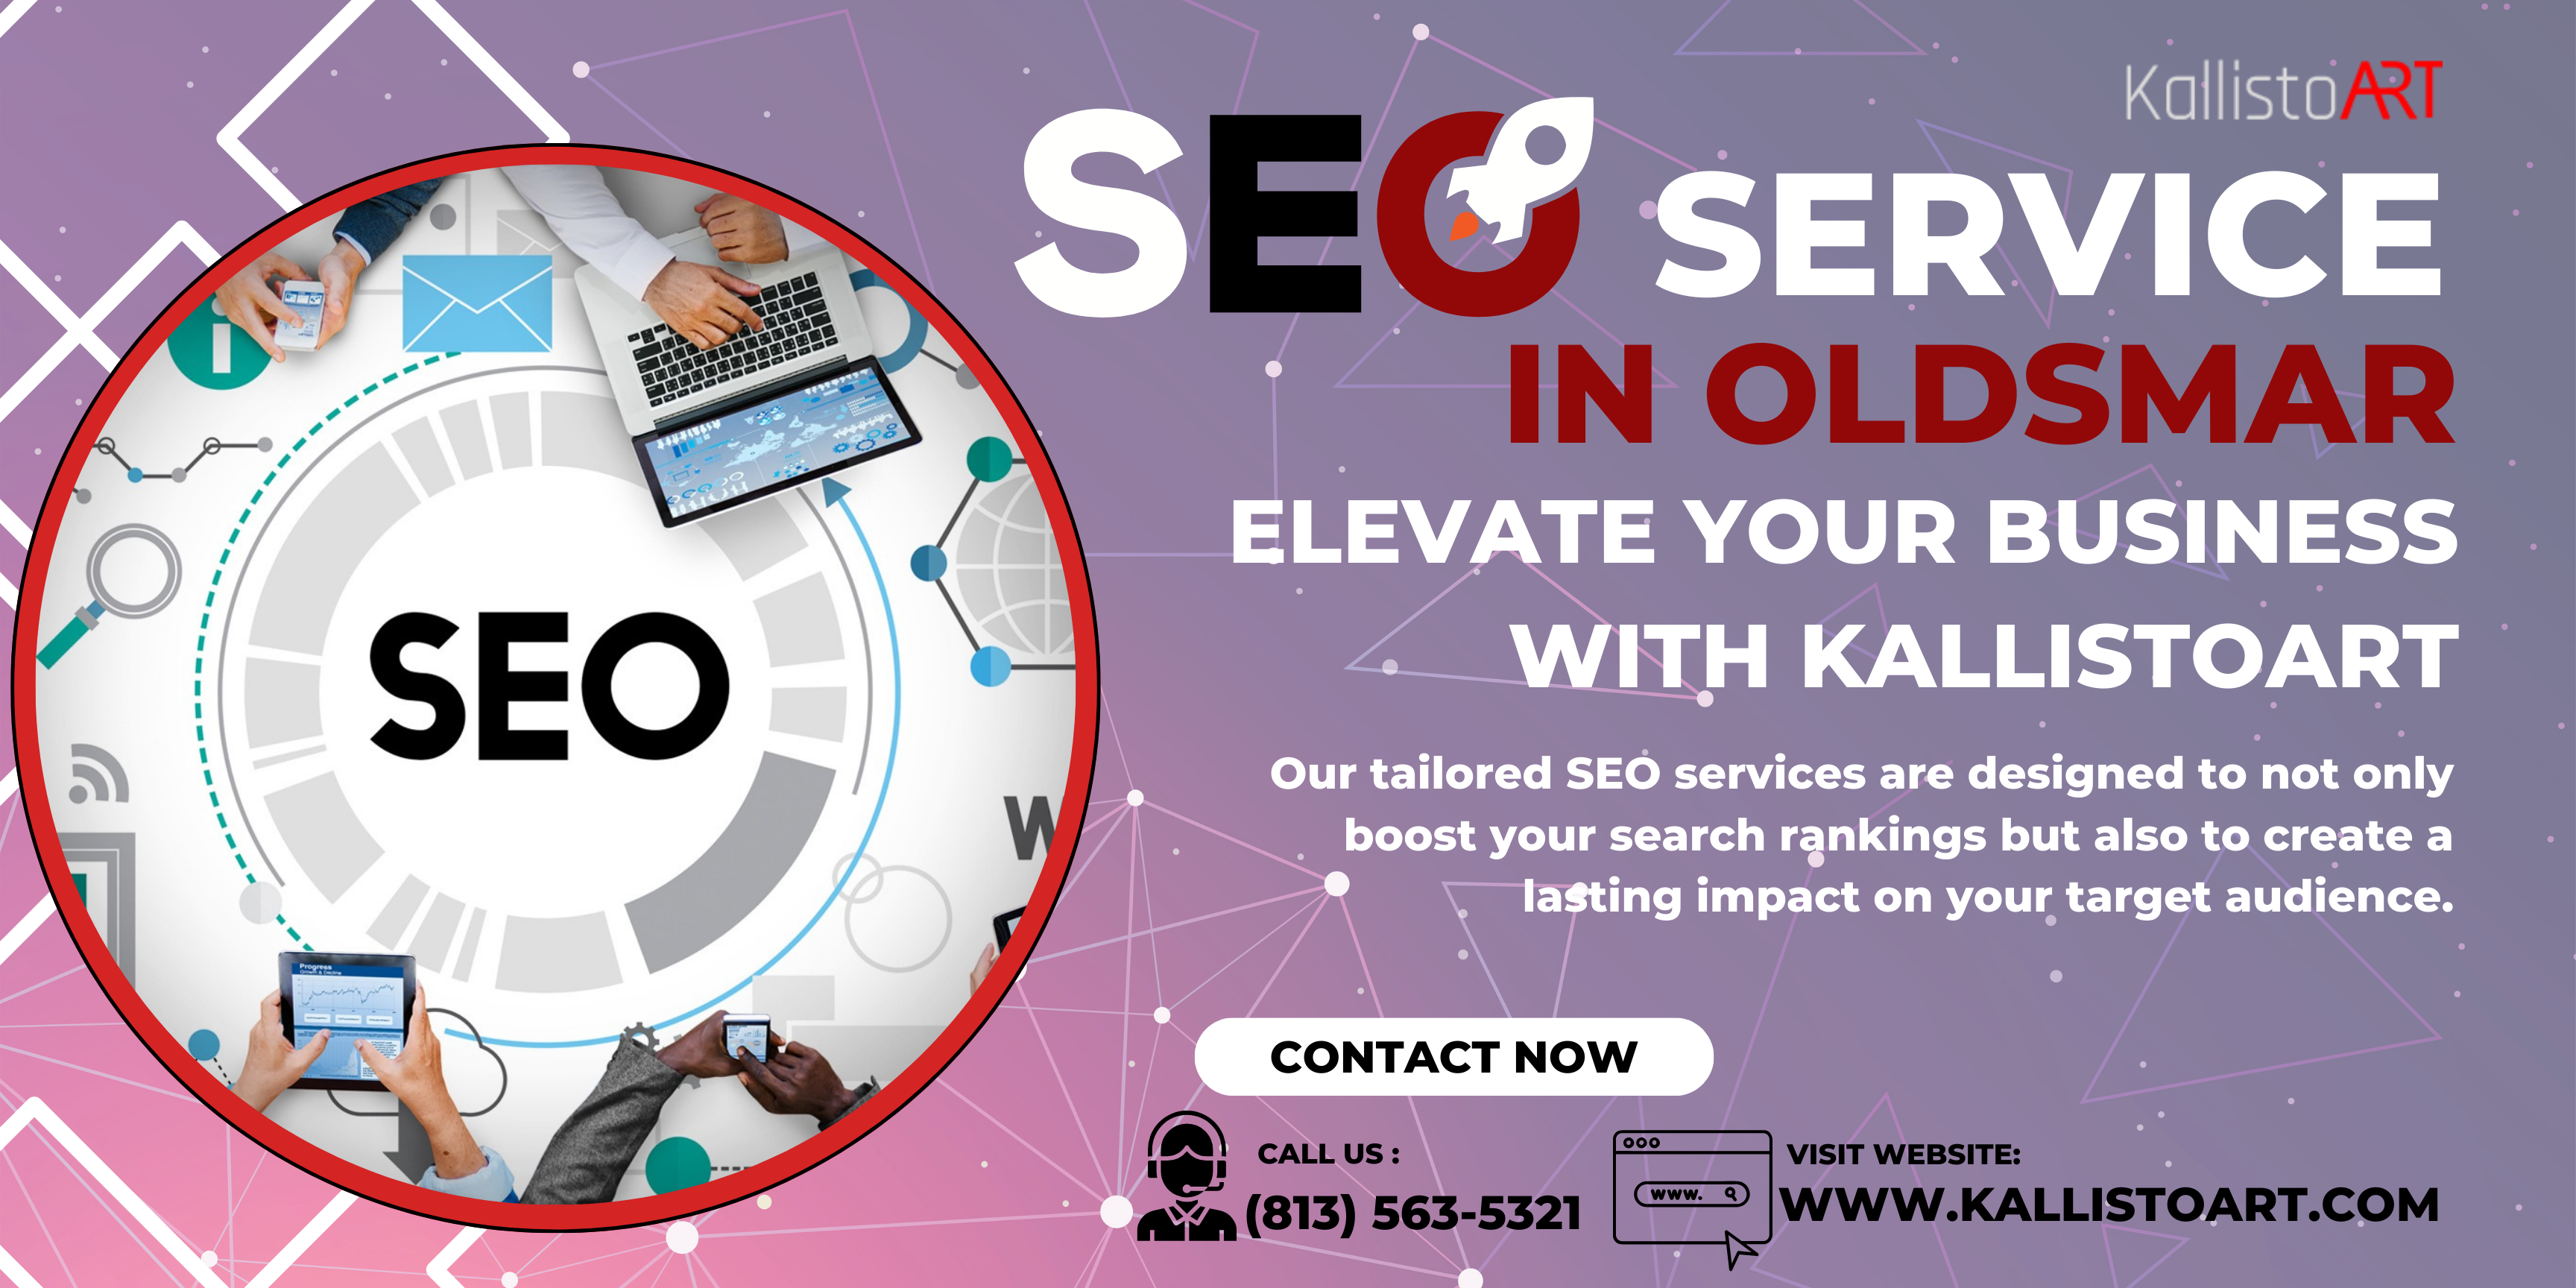 SEO services in Oldsmar